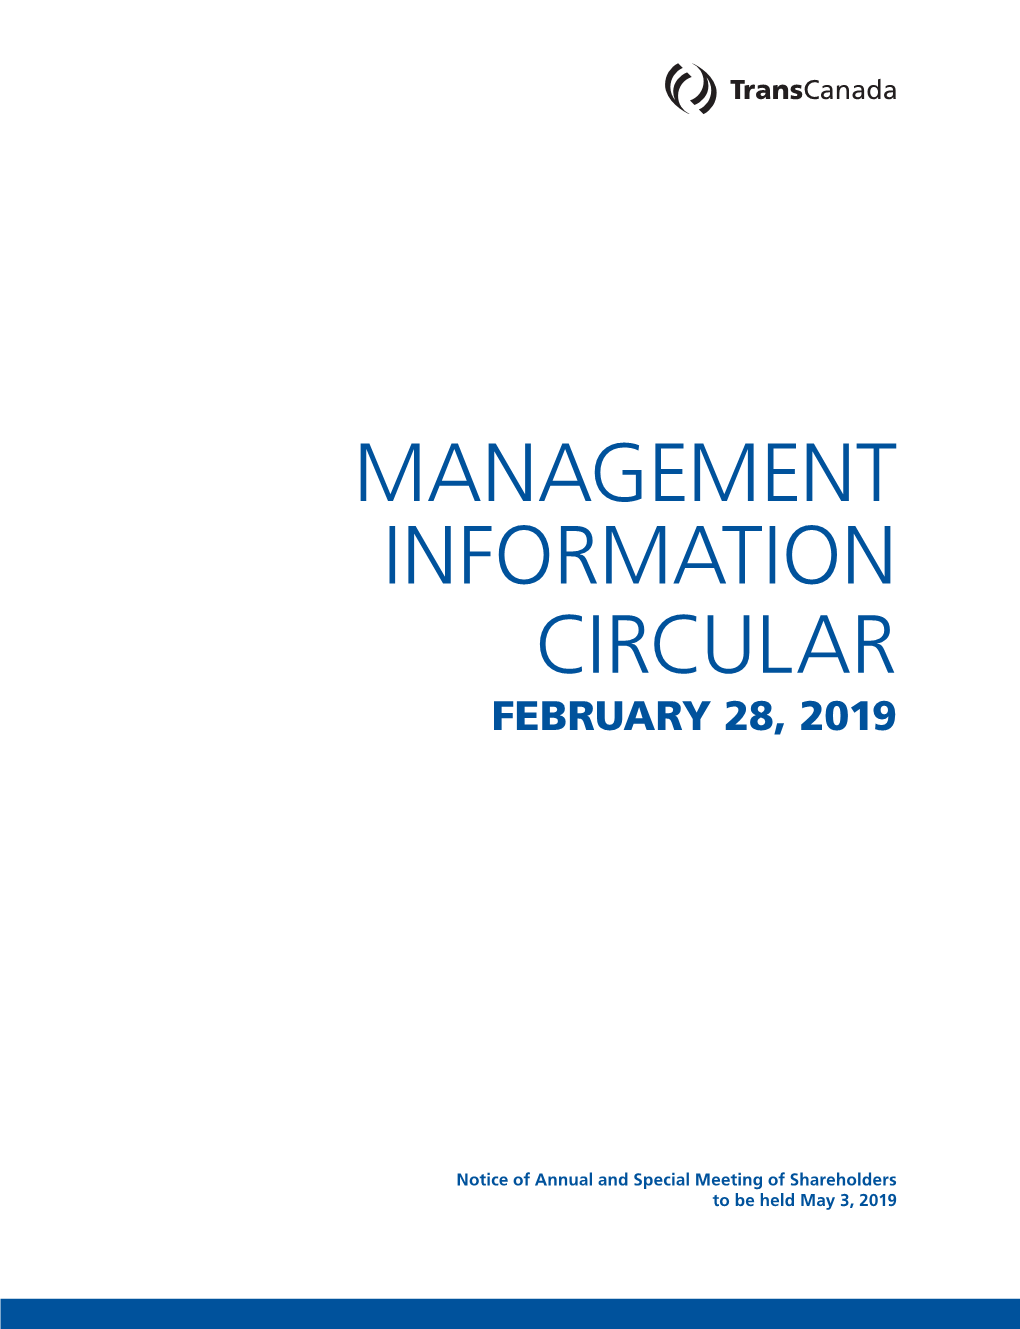 Management Information Circular 2019 1 Notice of 2019 Annual and Special Meeting